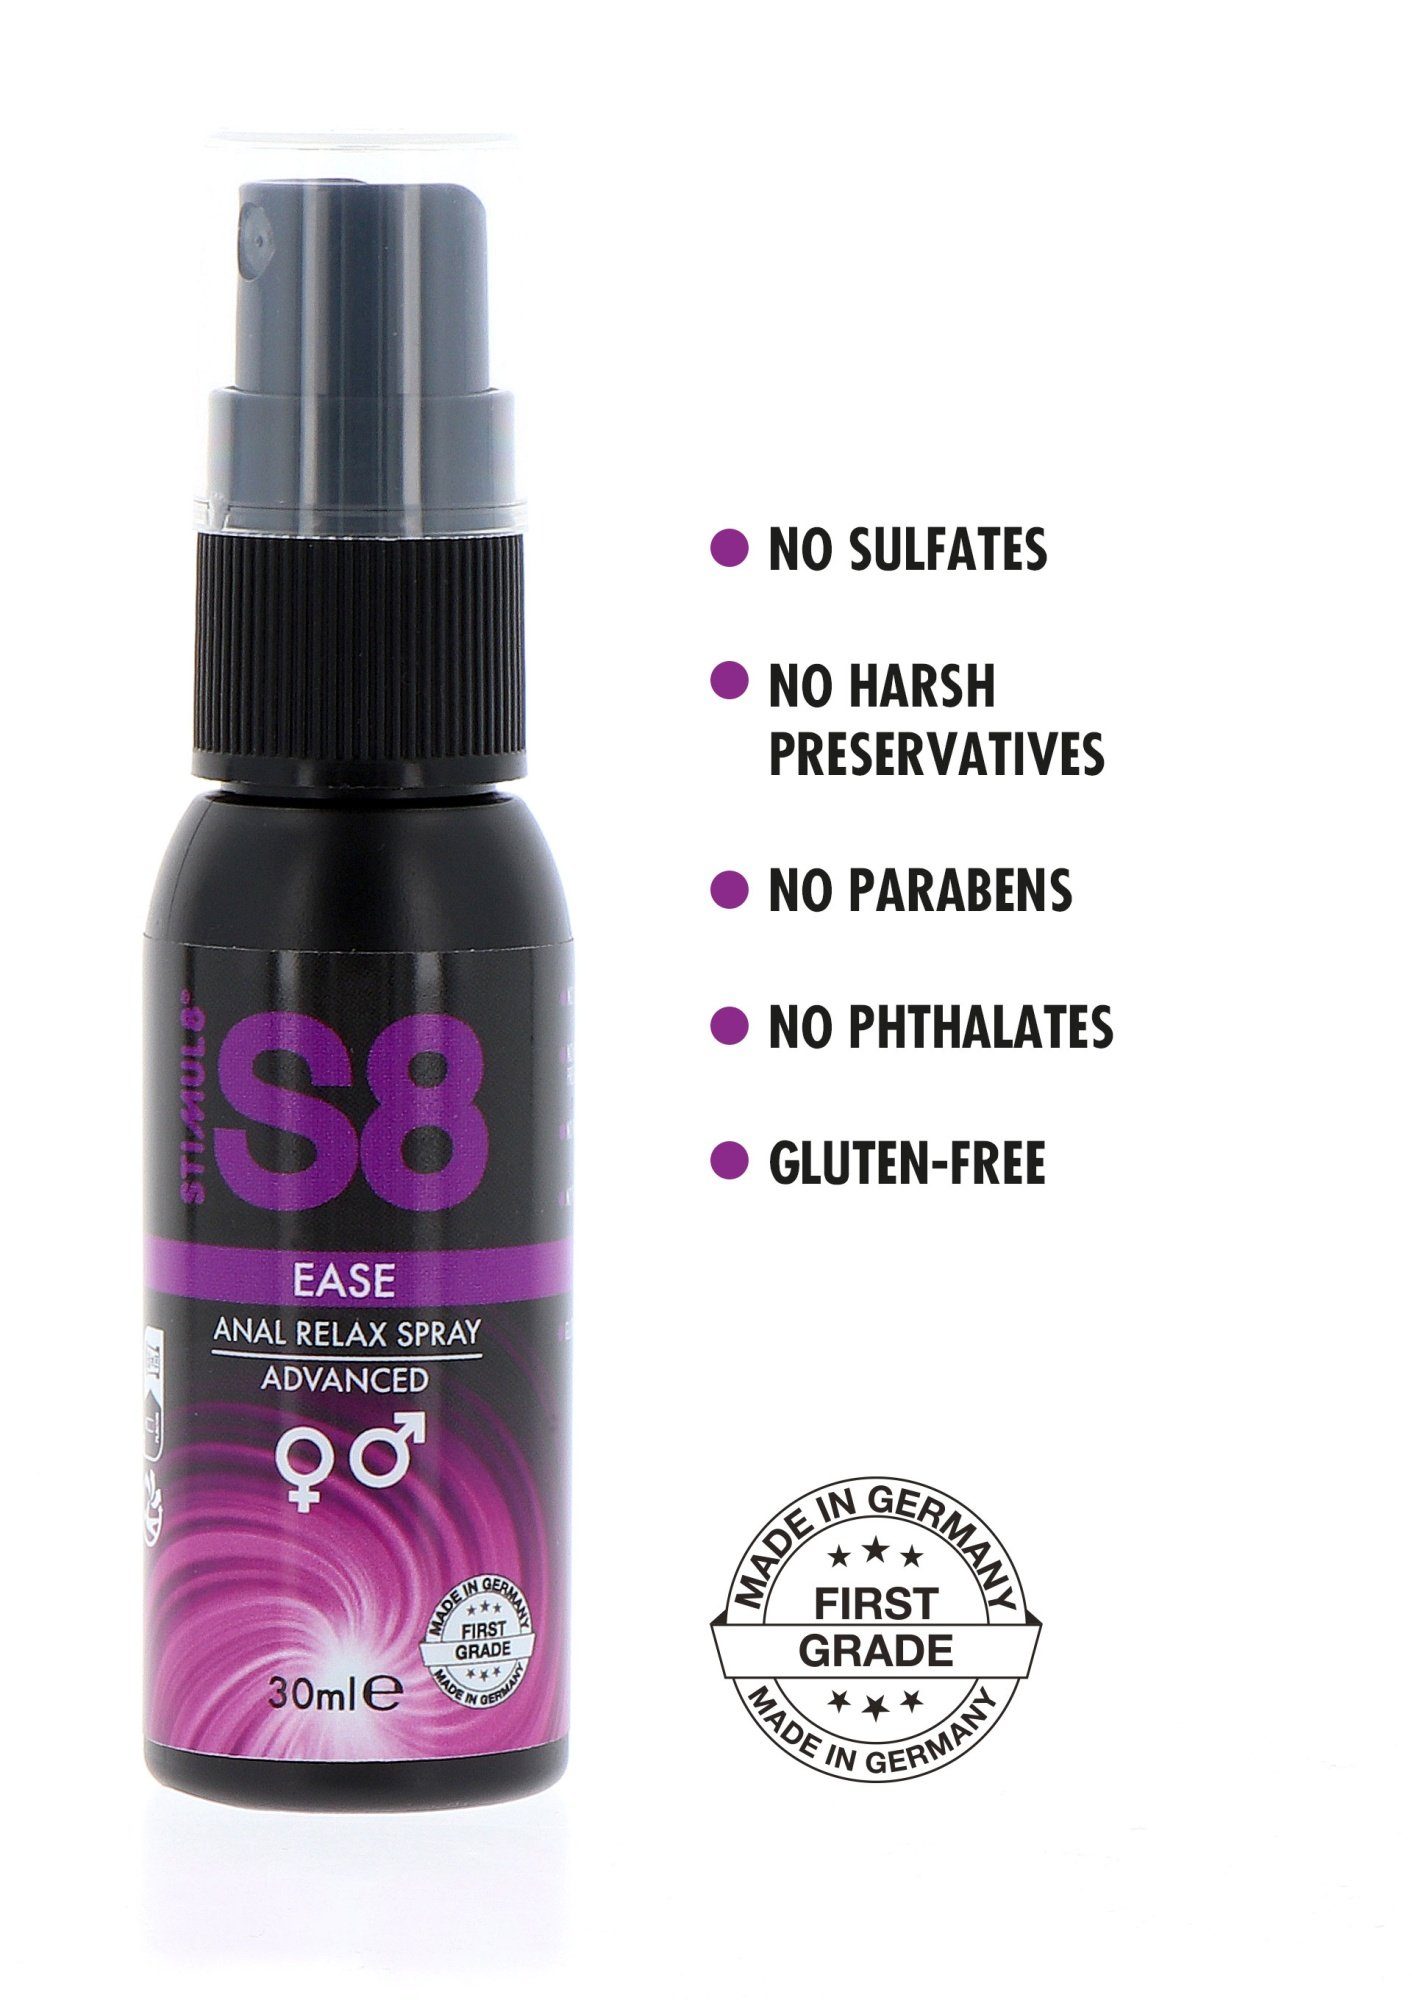 Analgleitgel S8 Spray Anal Relax Stimul8 ml 30 Ease